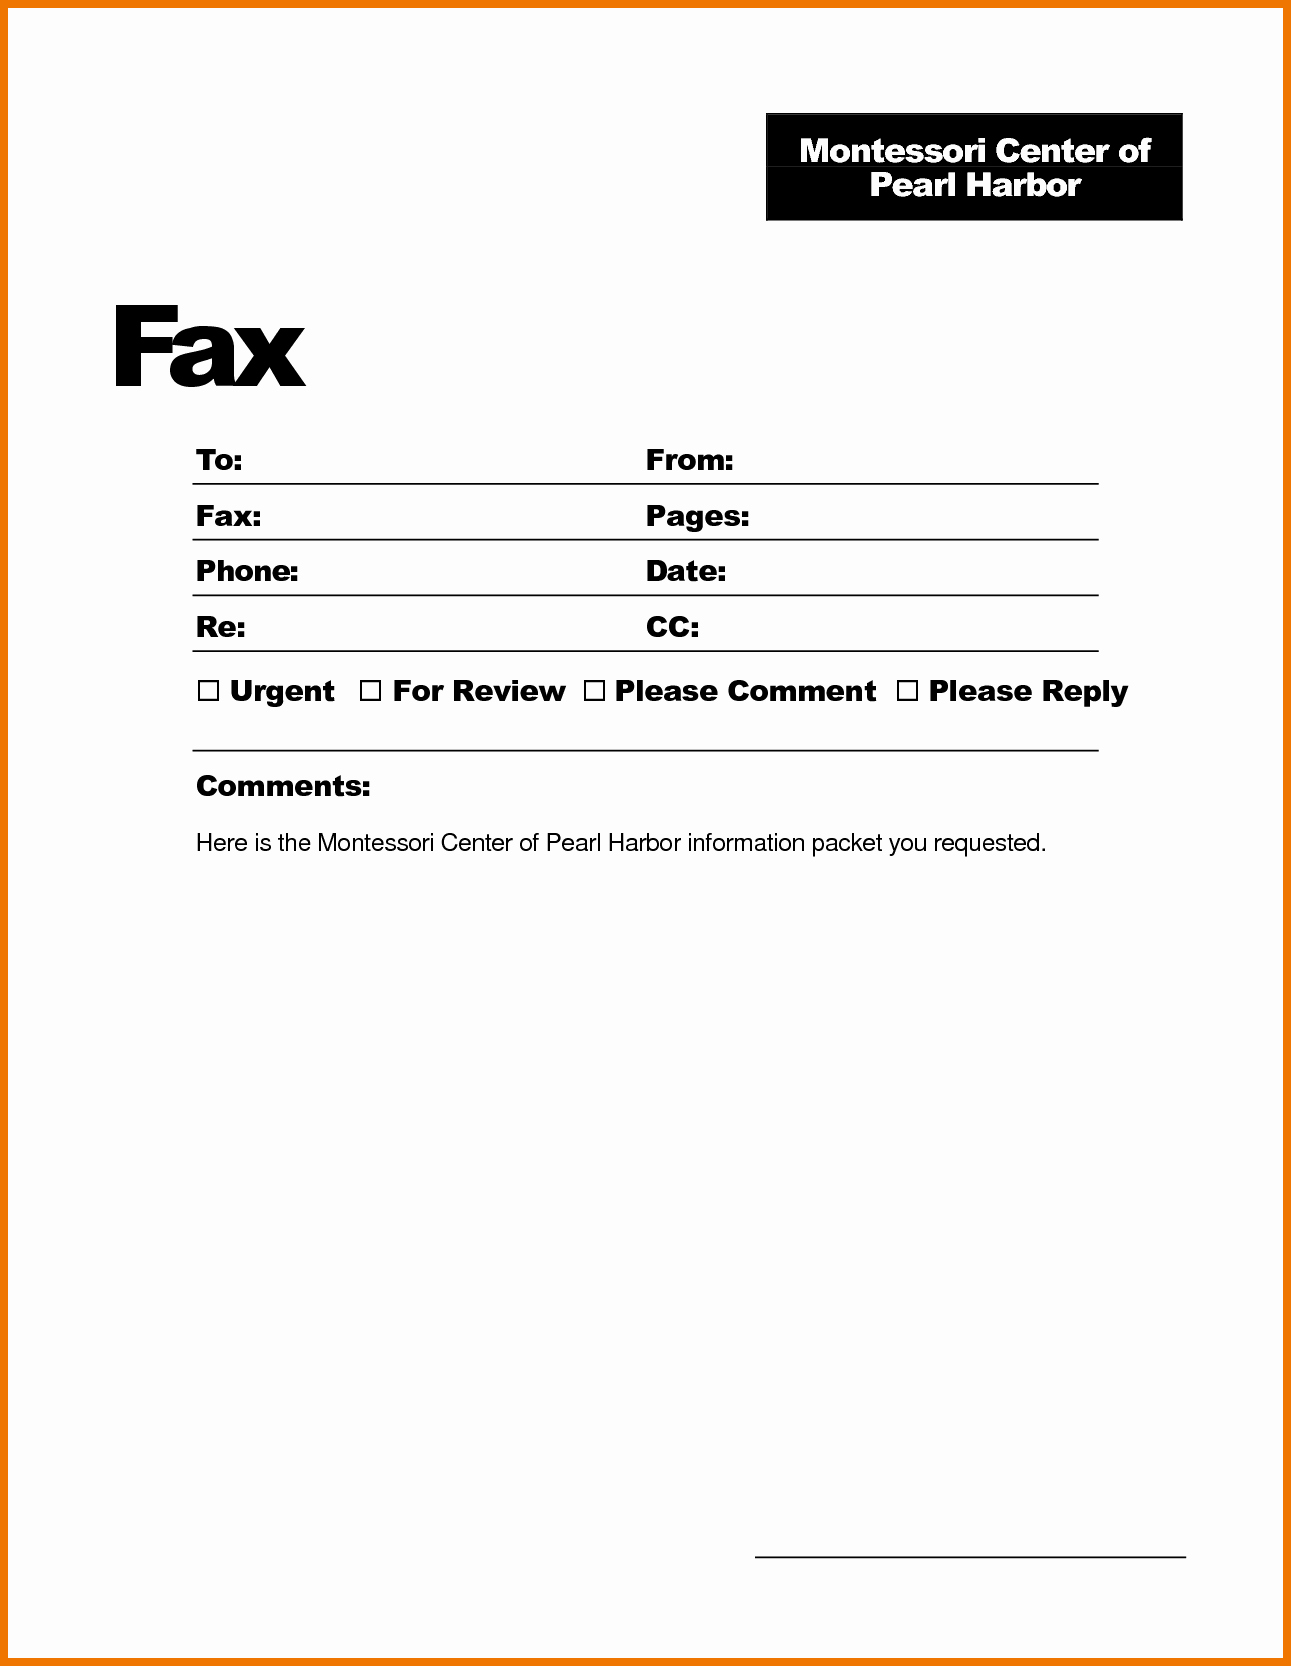 Cover Letter for Fax Document Elegant Fax Cover Letter Microsoft Word 2007